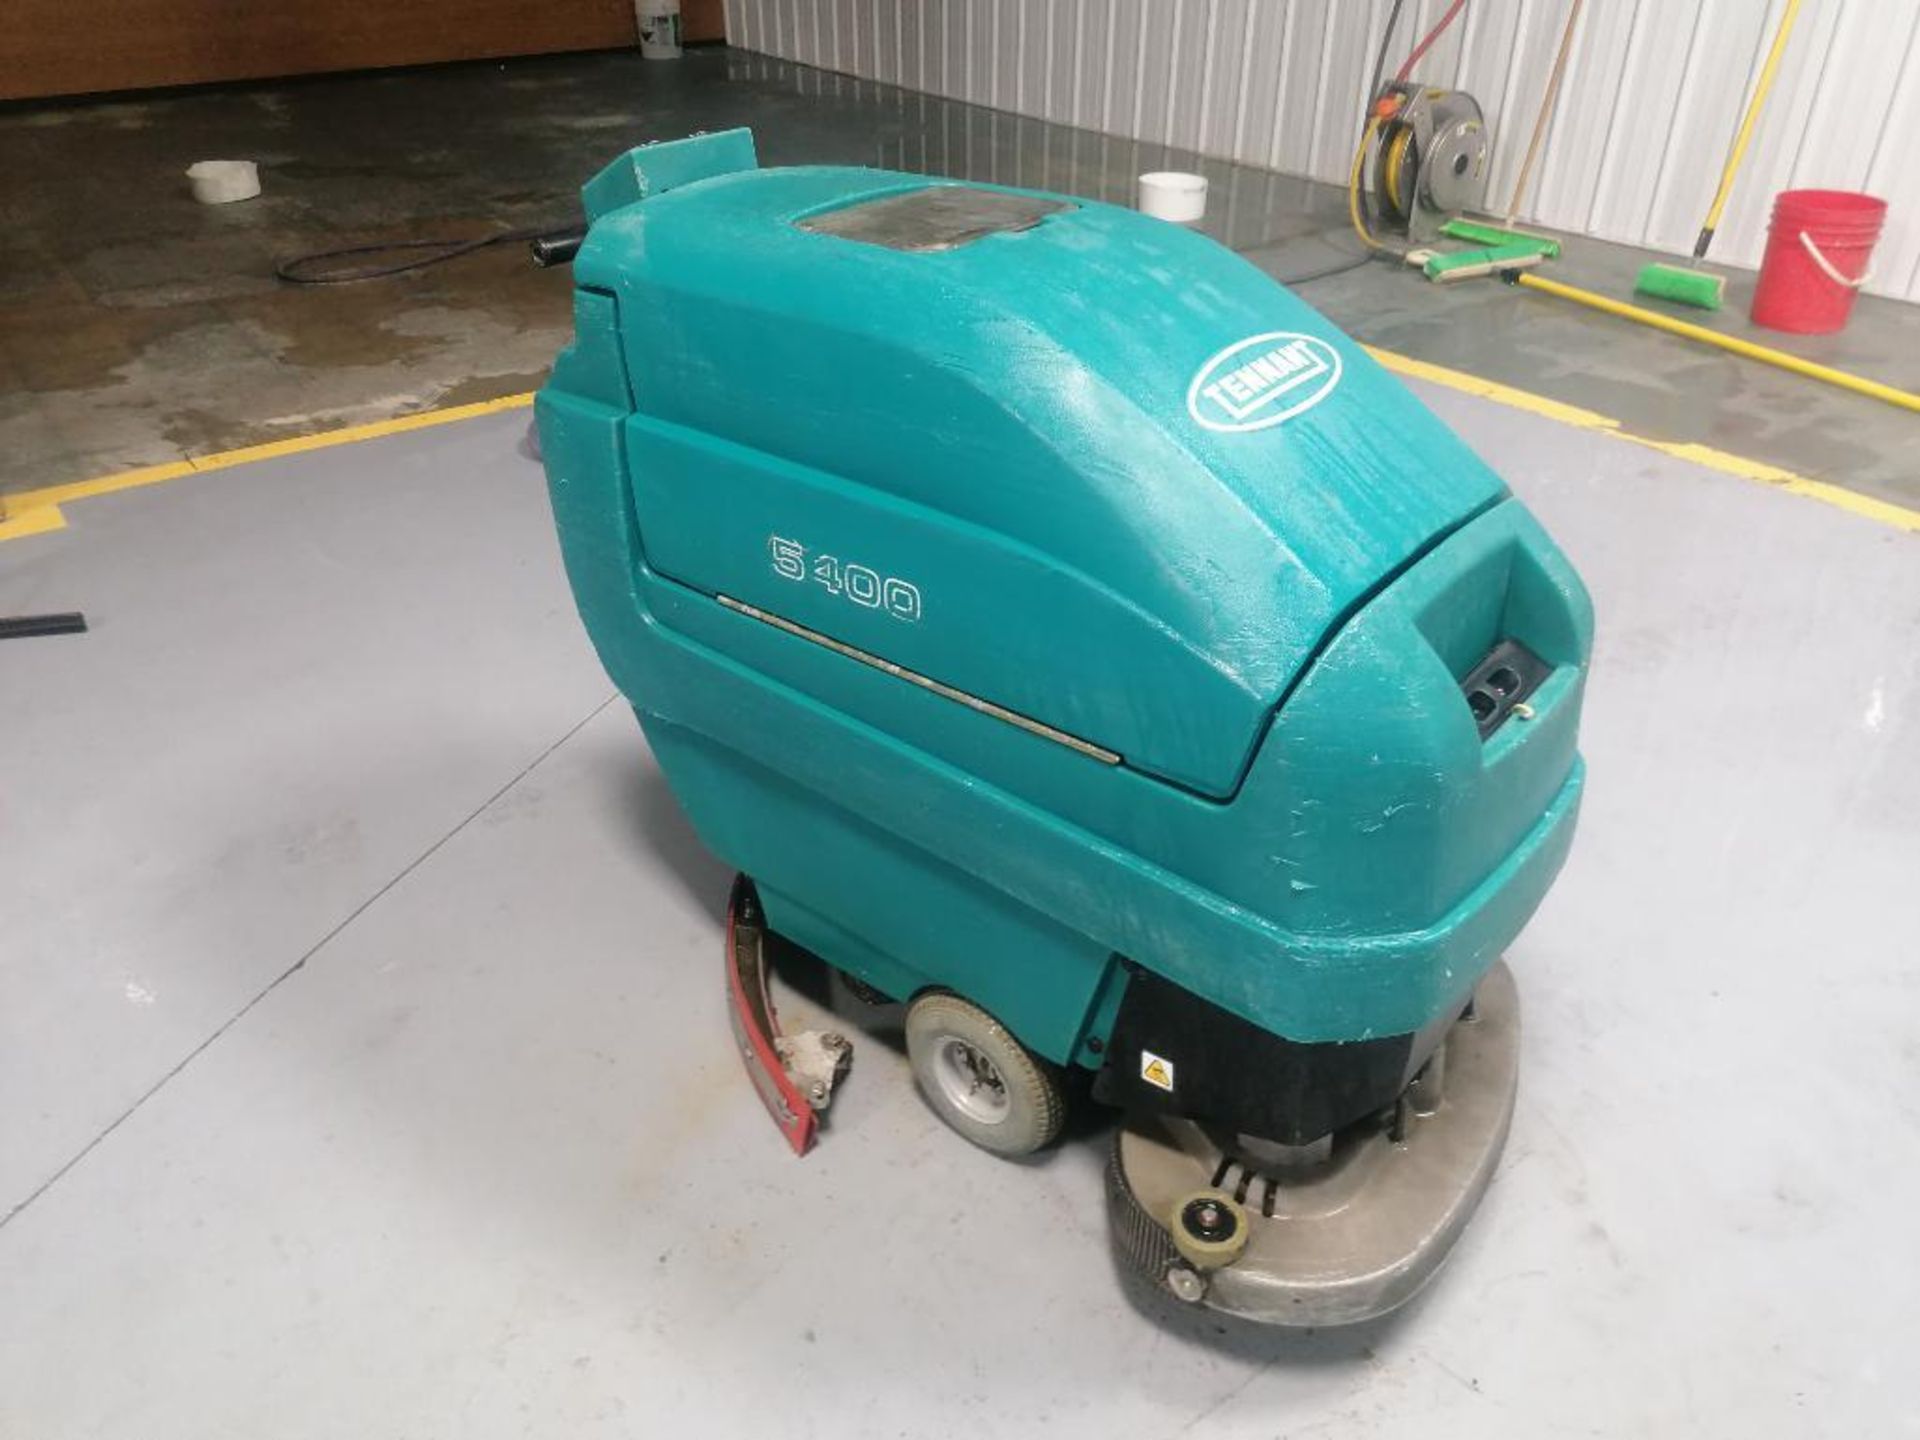 Tennant 5400 Floor Scrubber, Serial #540010203098, 24 Volts. Located in Mt. Pleasant, IA. - Image 2 of 17